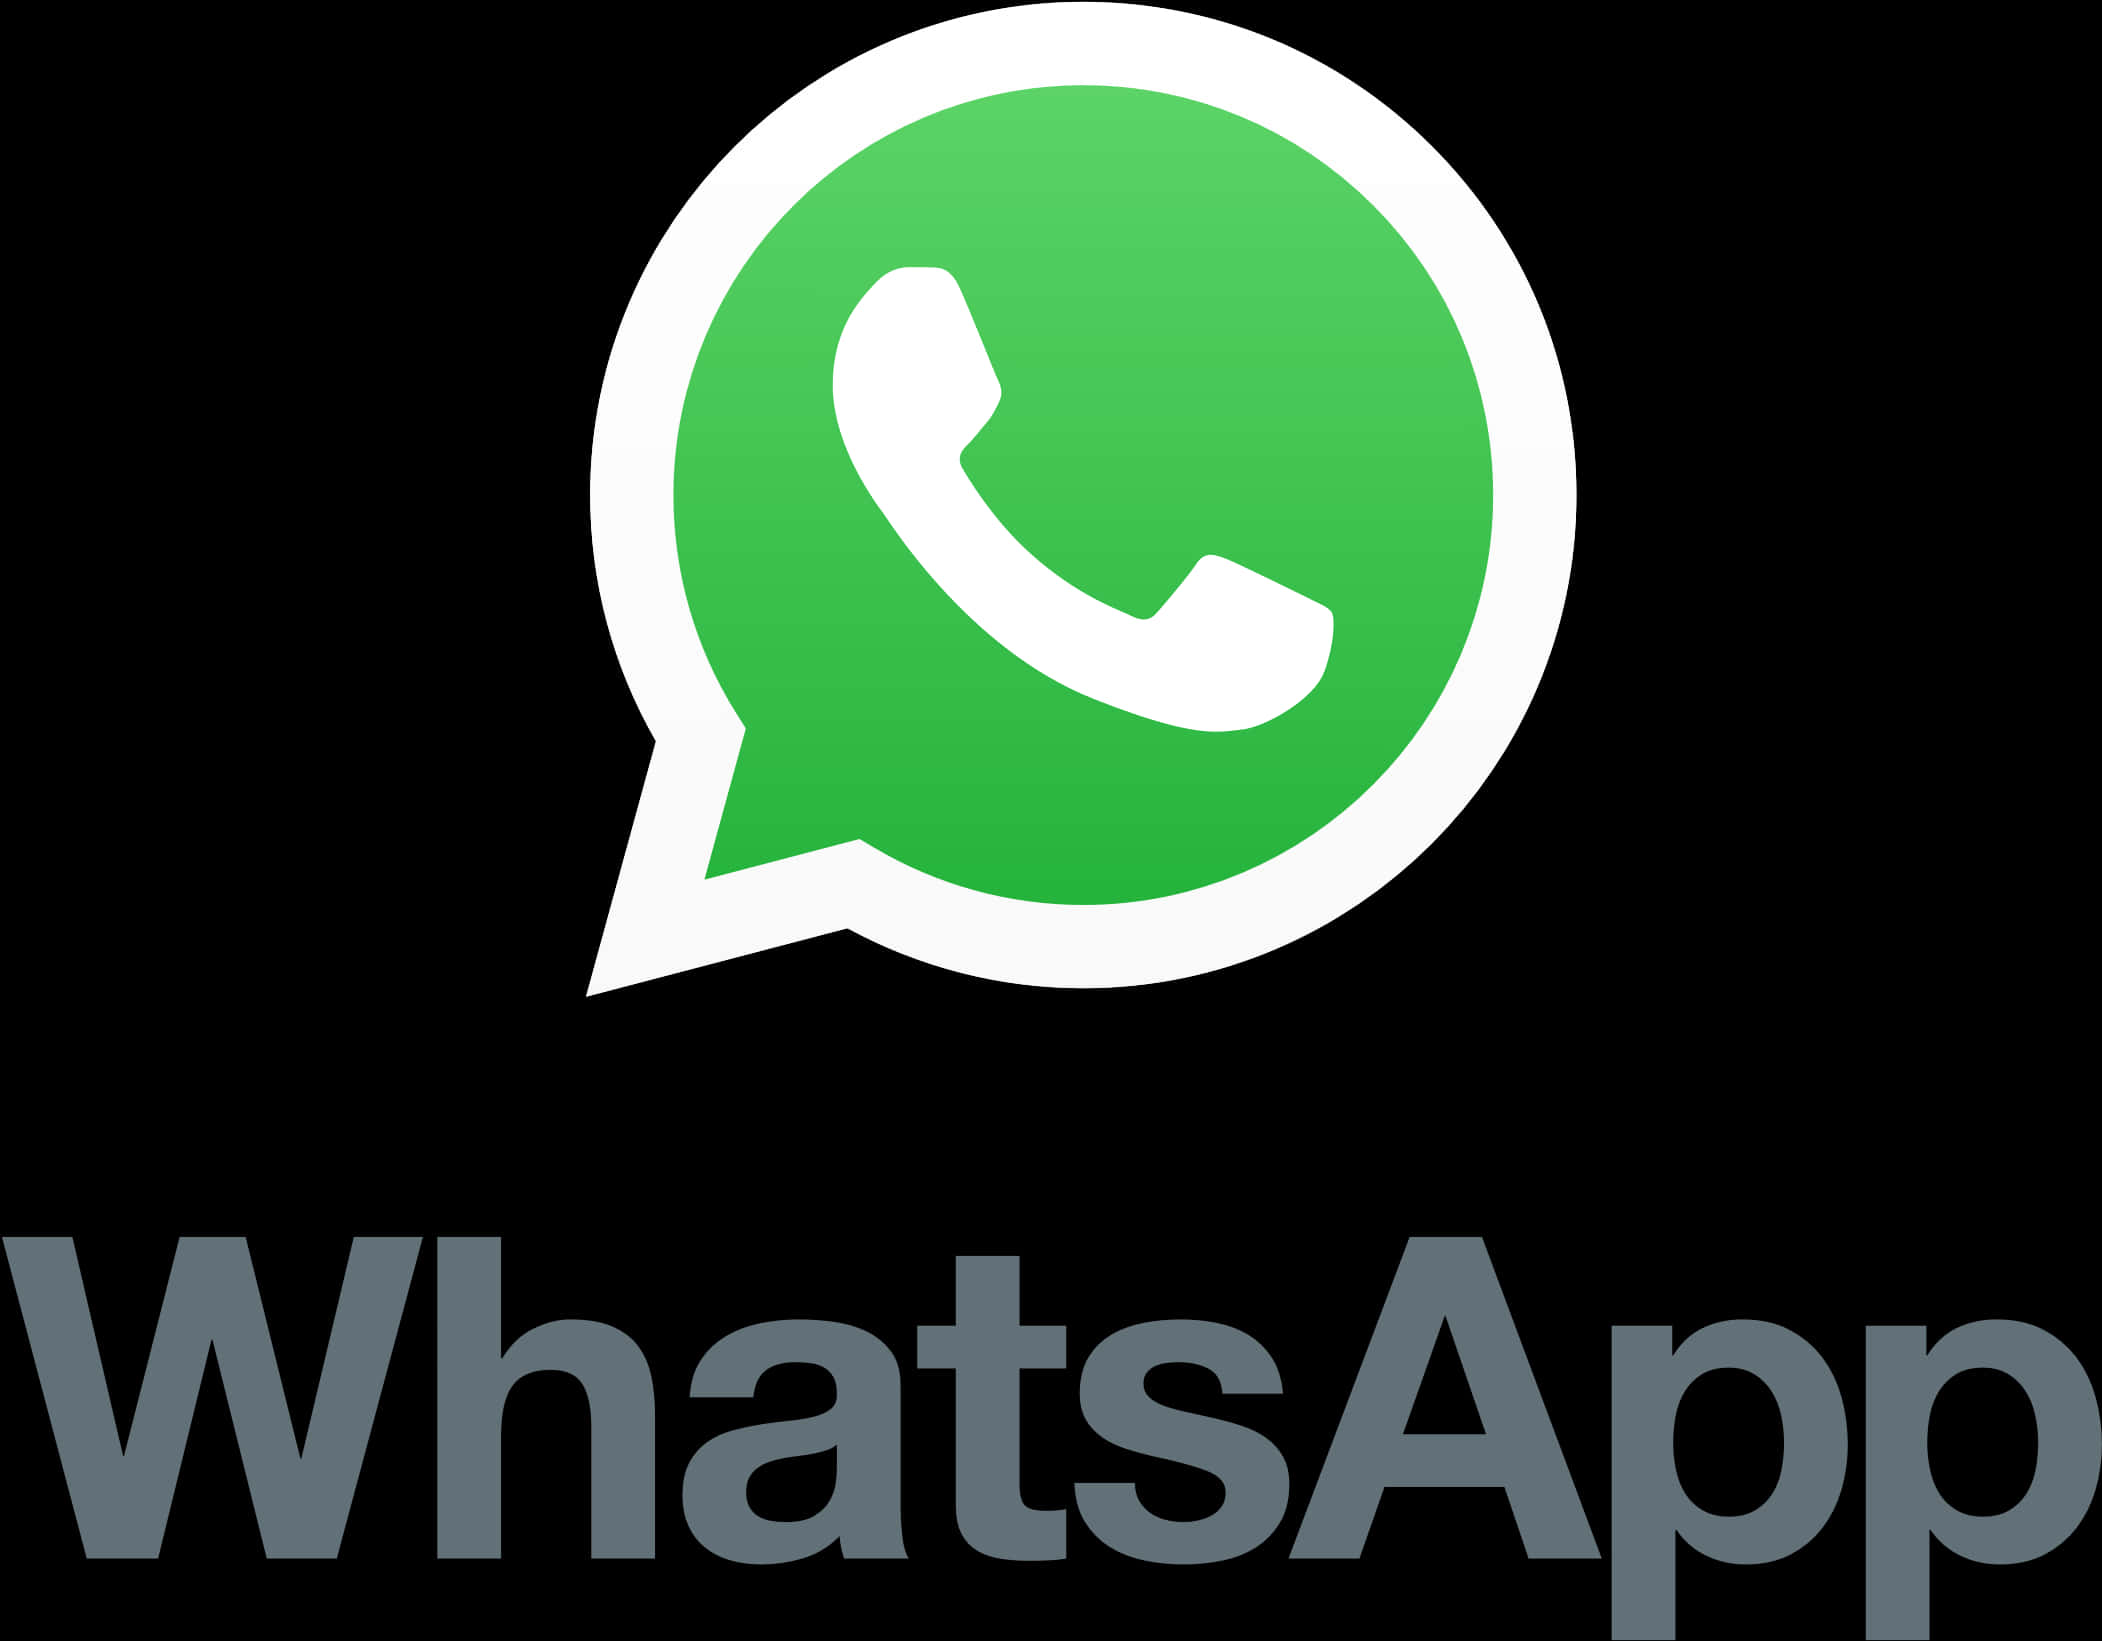 Whatsapp Logo With Text